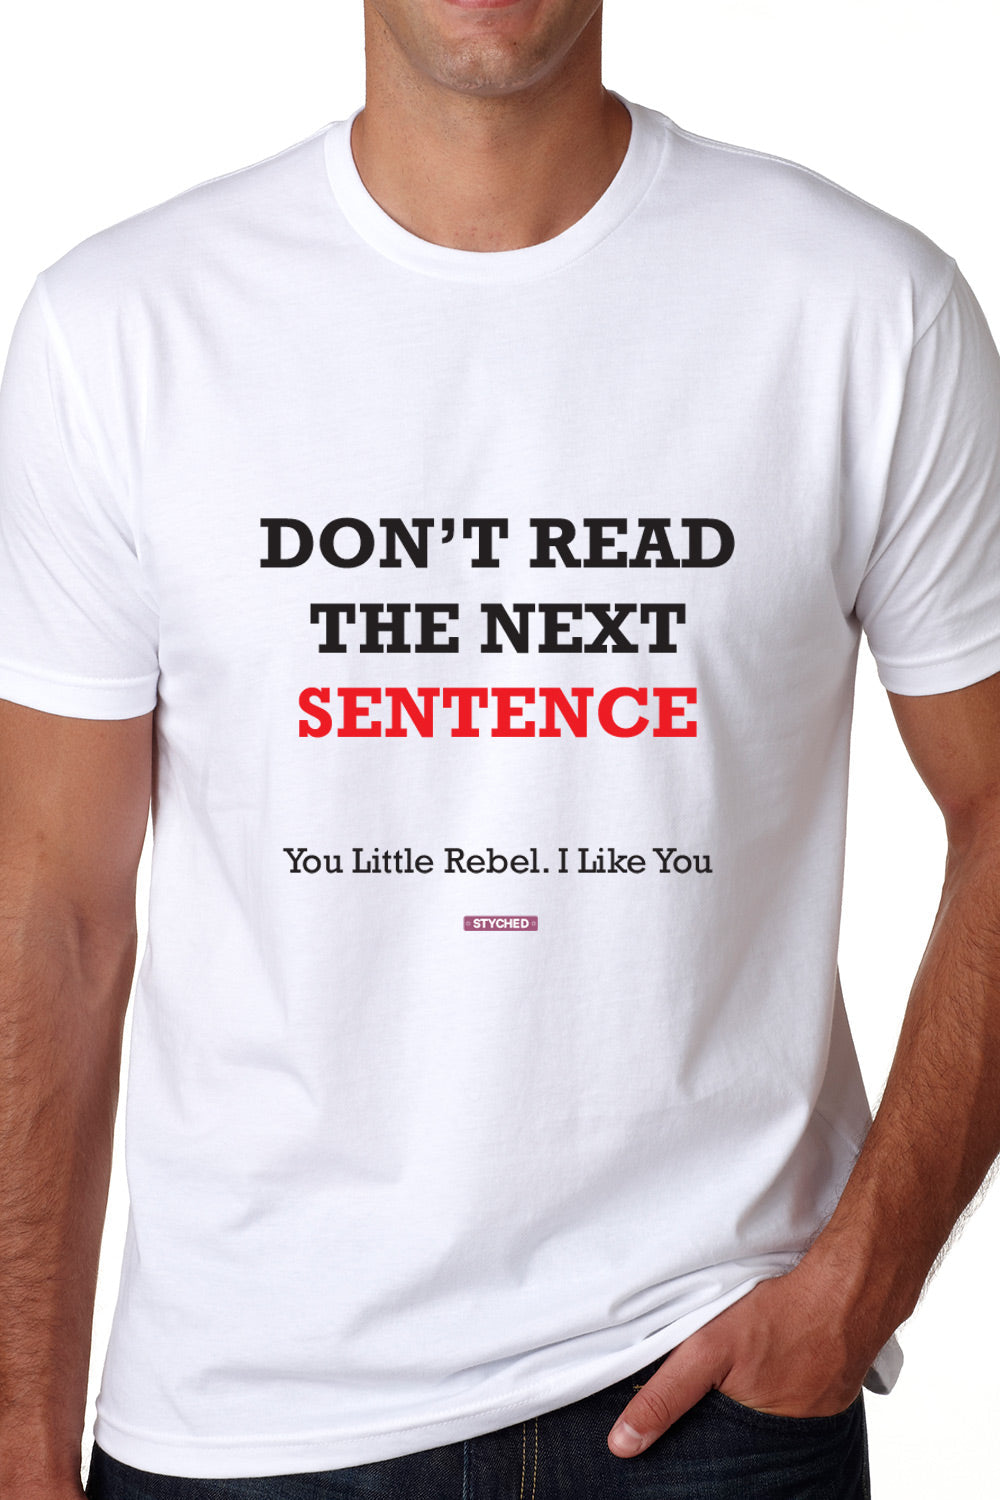 Don't Read the next line - Quirky Graphic T-Shirt White Color